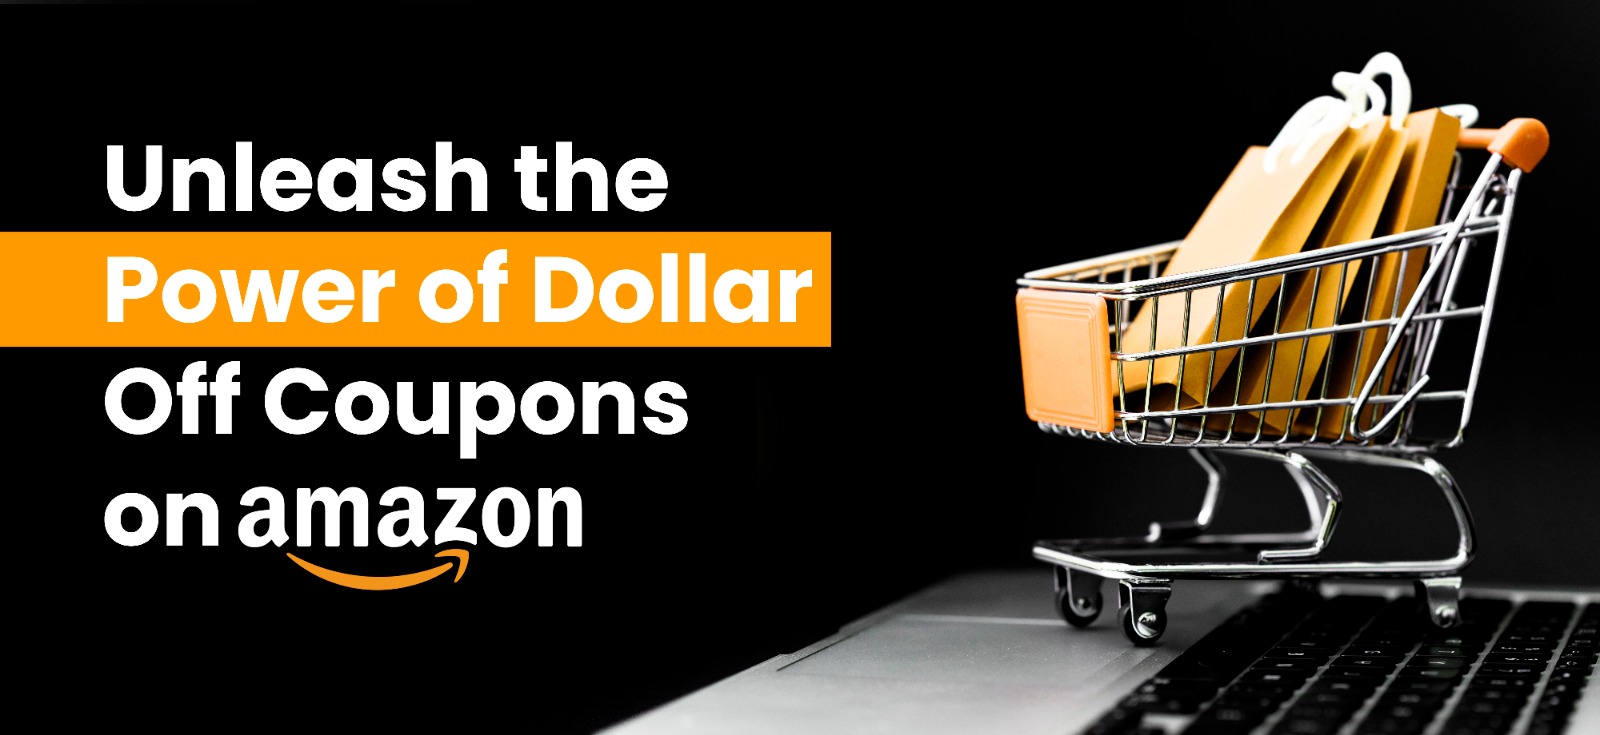 Unleash the Power of Dollar Off Coupons on Amazon